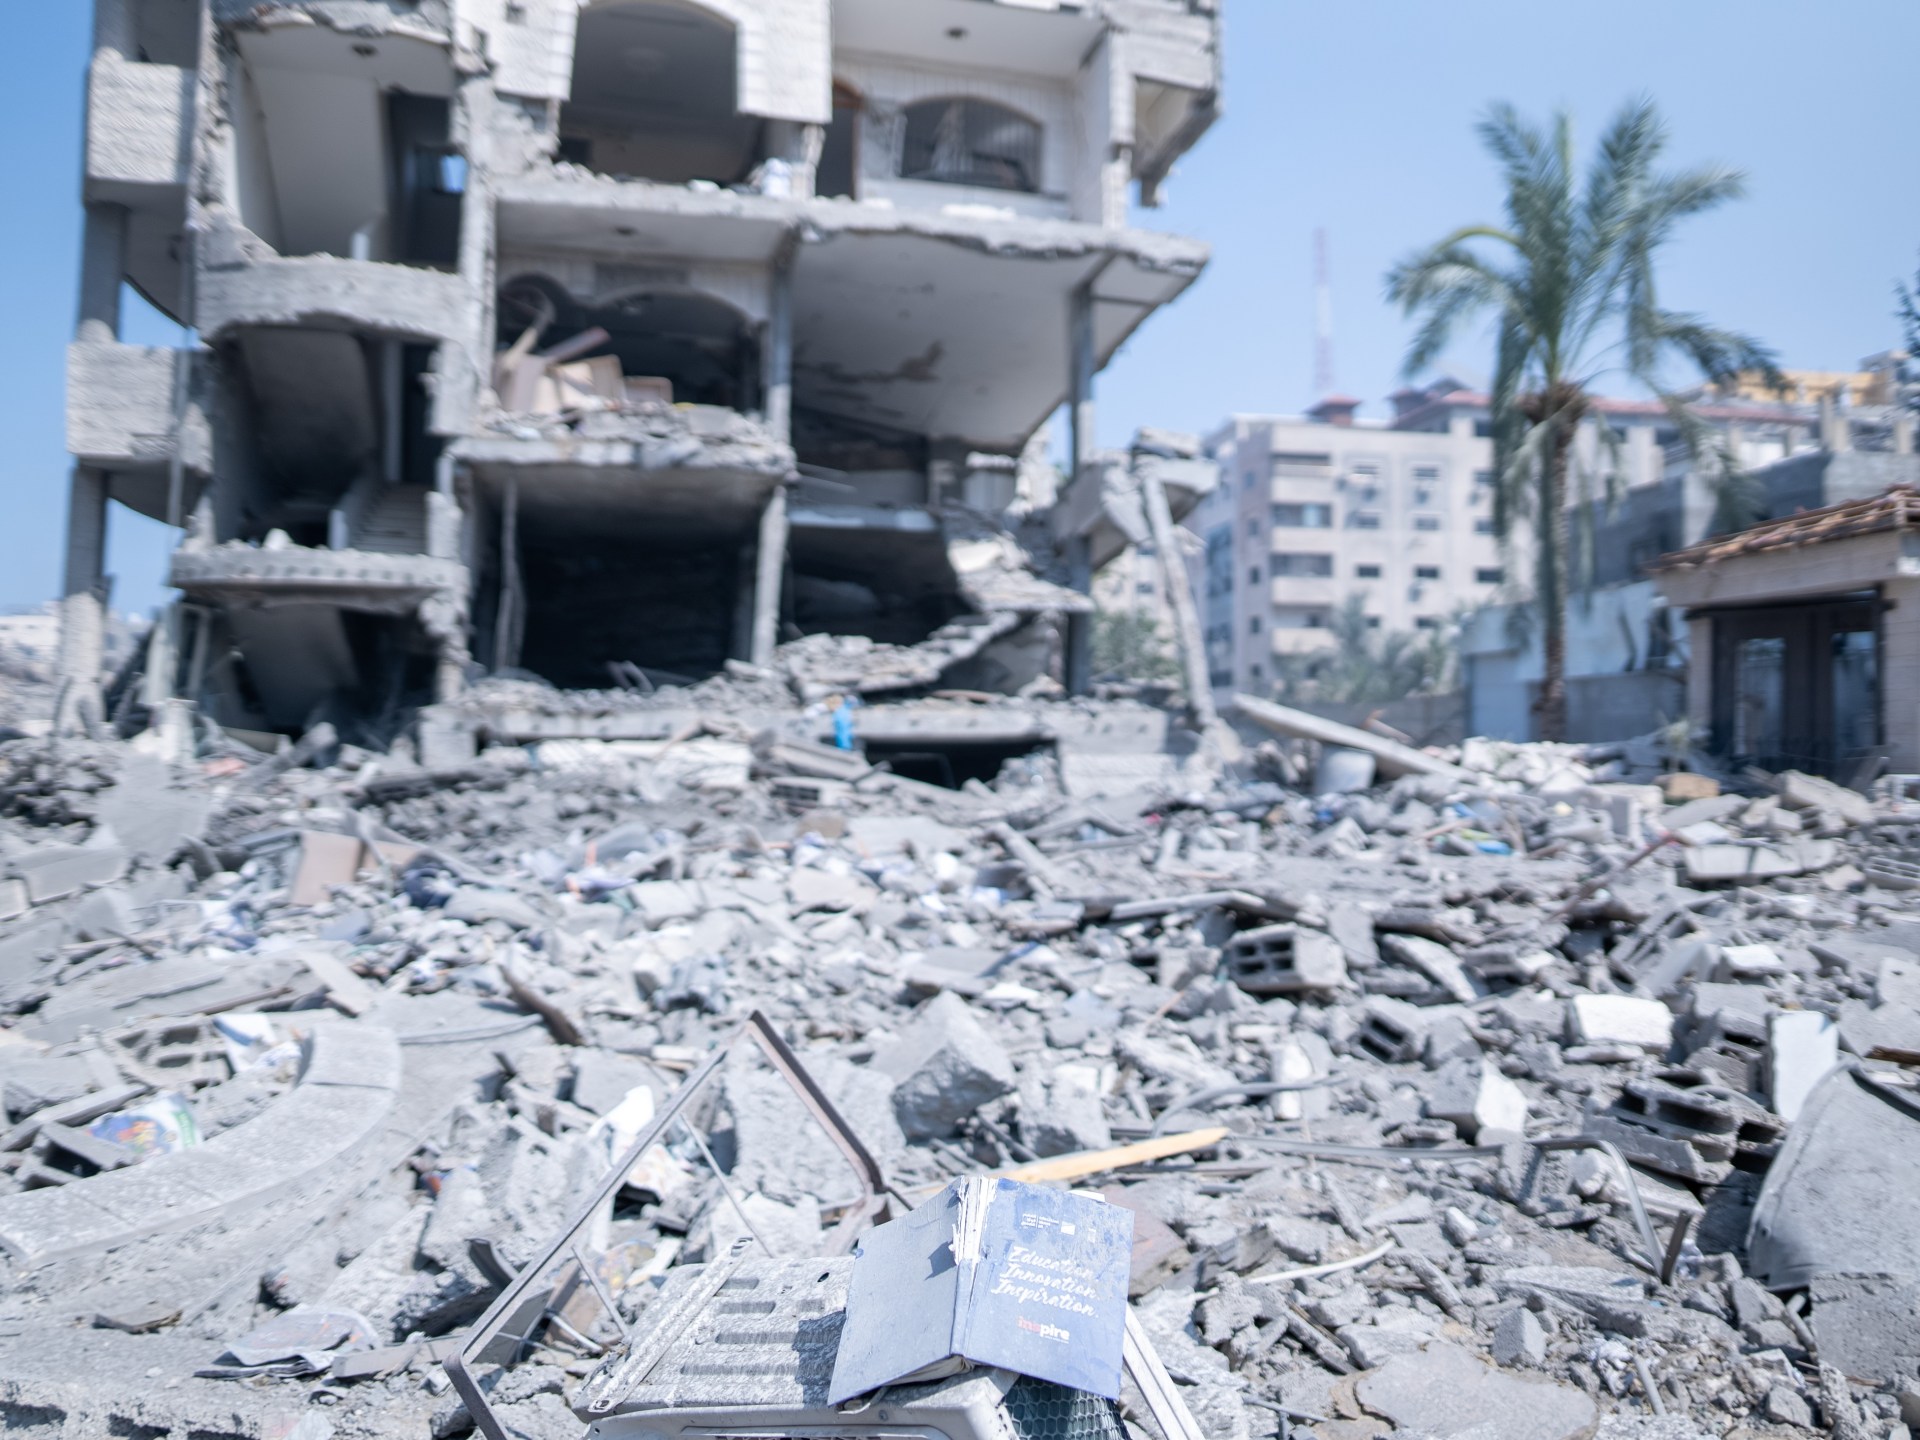 Israels targeting of Gaza schools eroding foundation for societal growth | Israel-Palestine conflict News [Video]